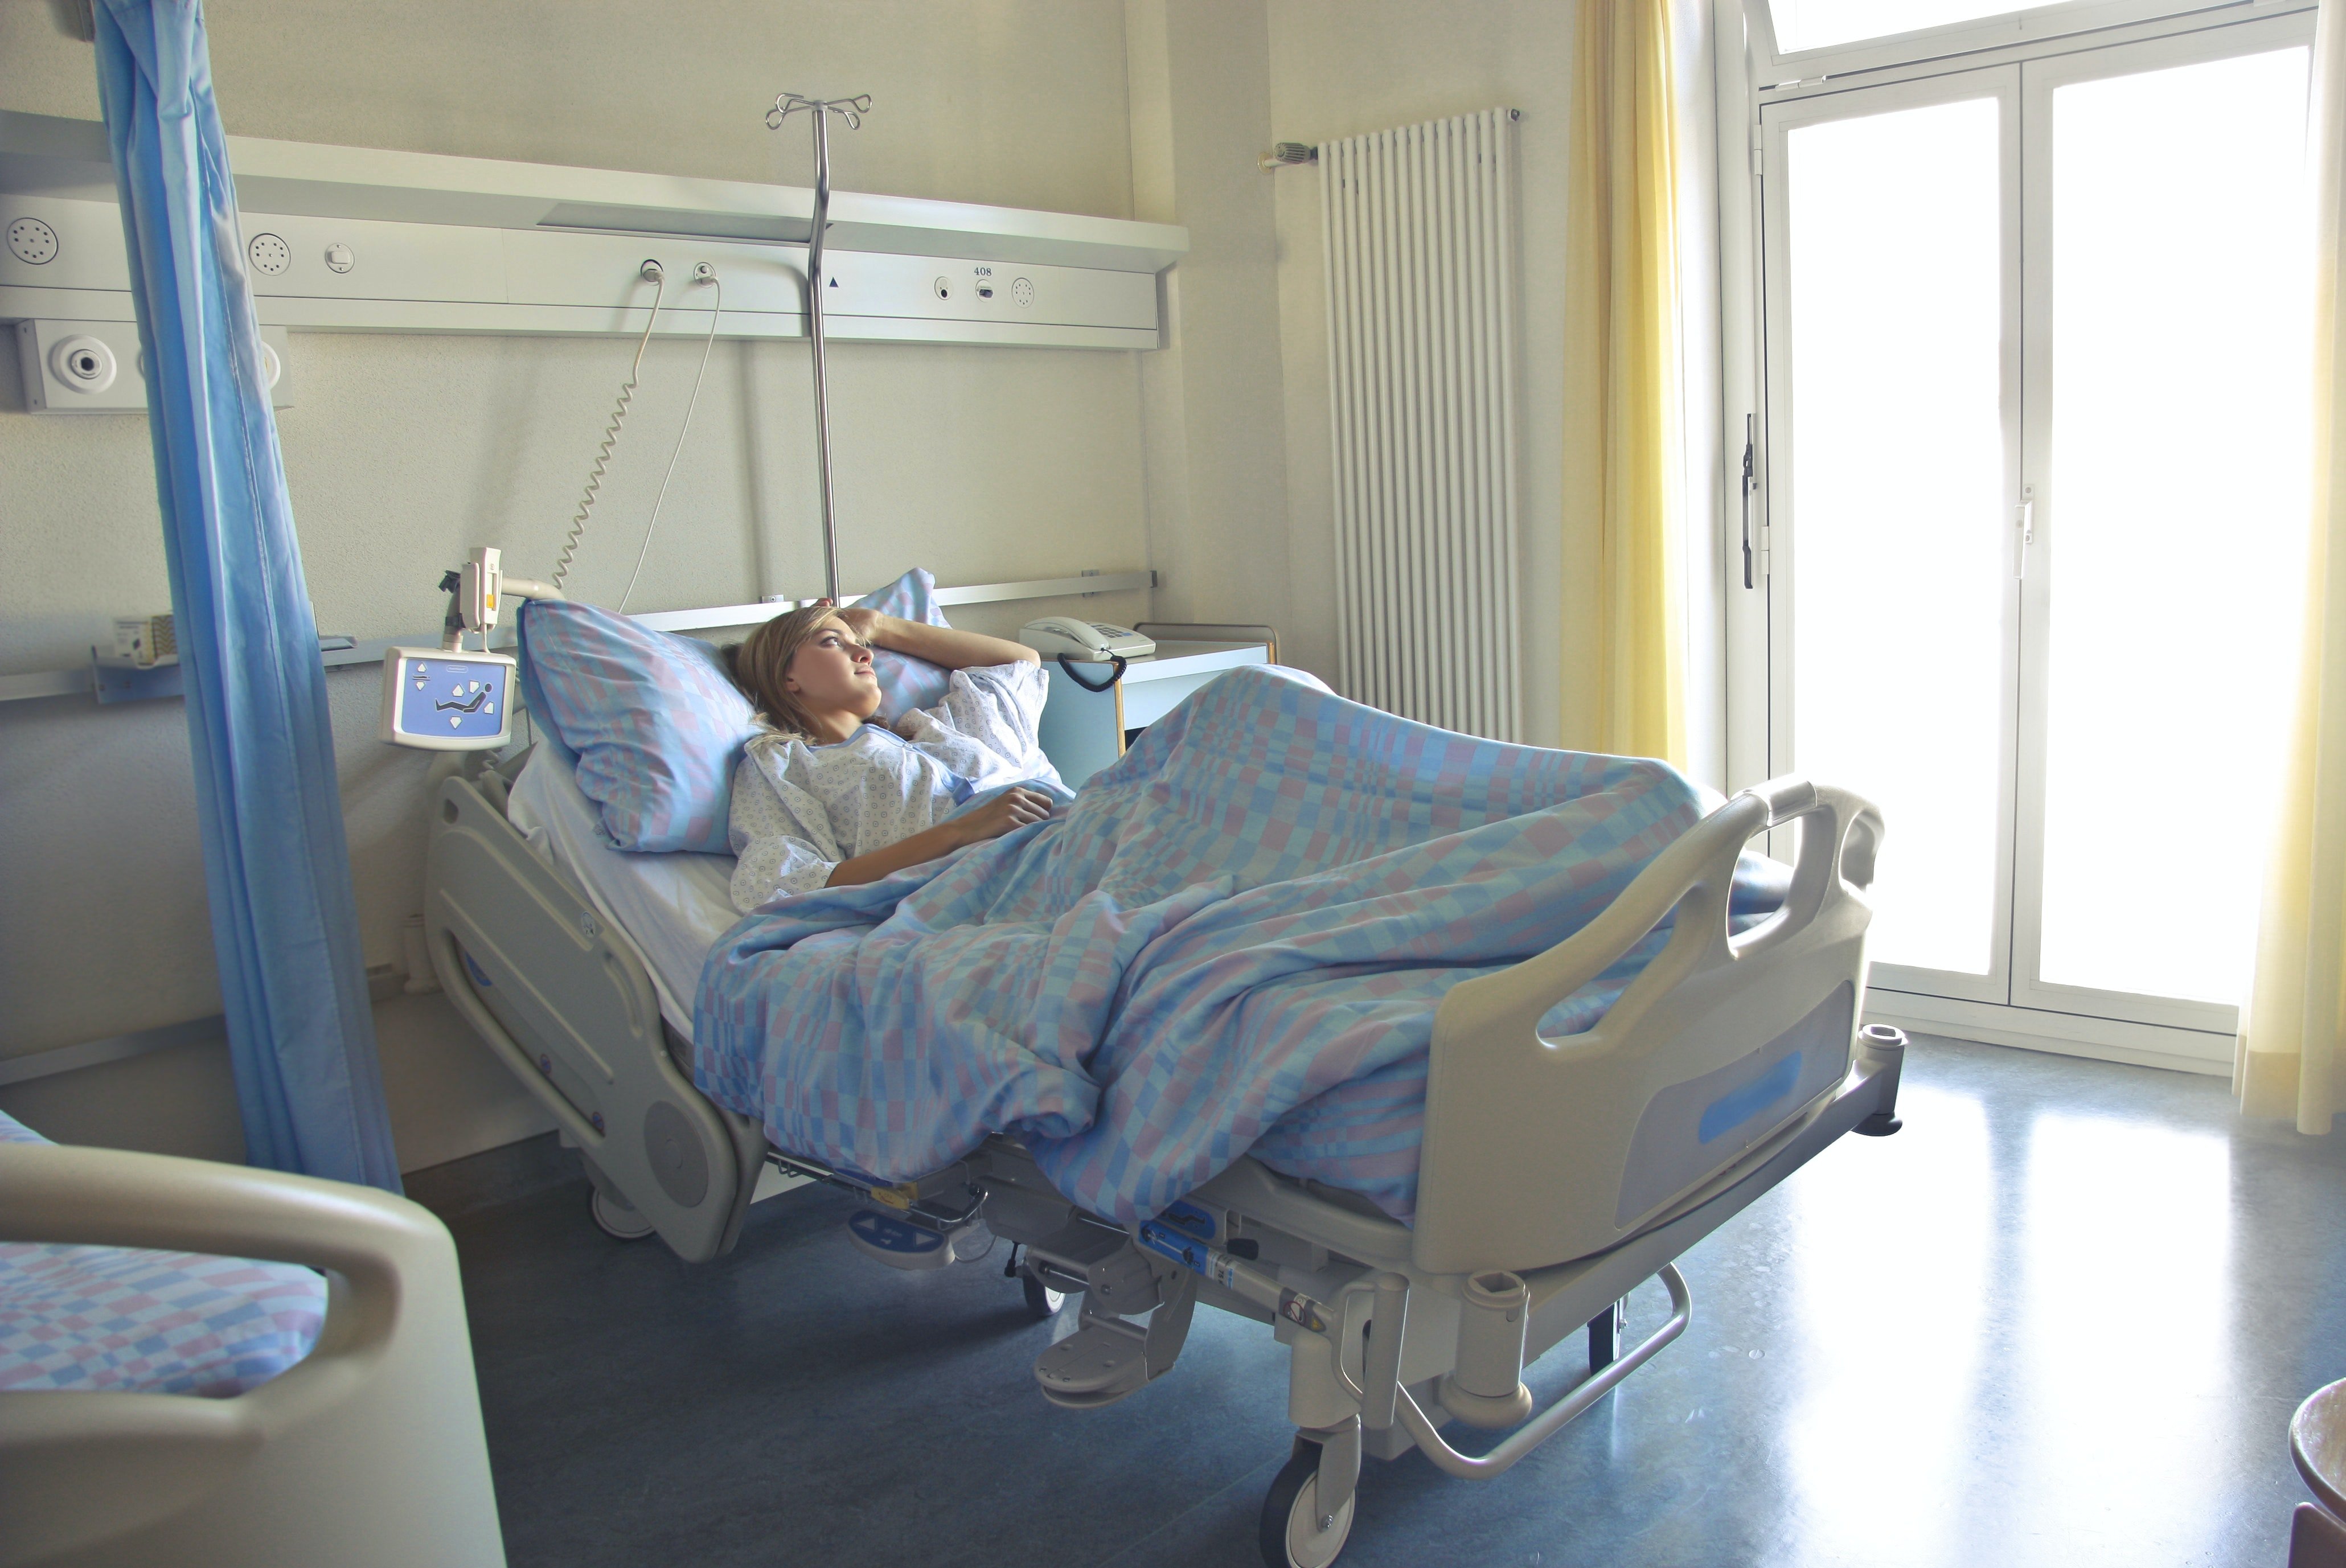 A woman on a hospital bed. | Photo: Pexels